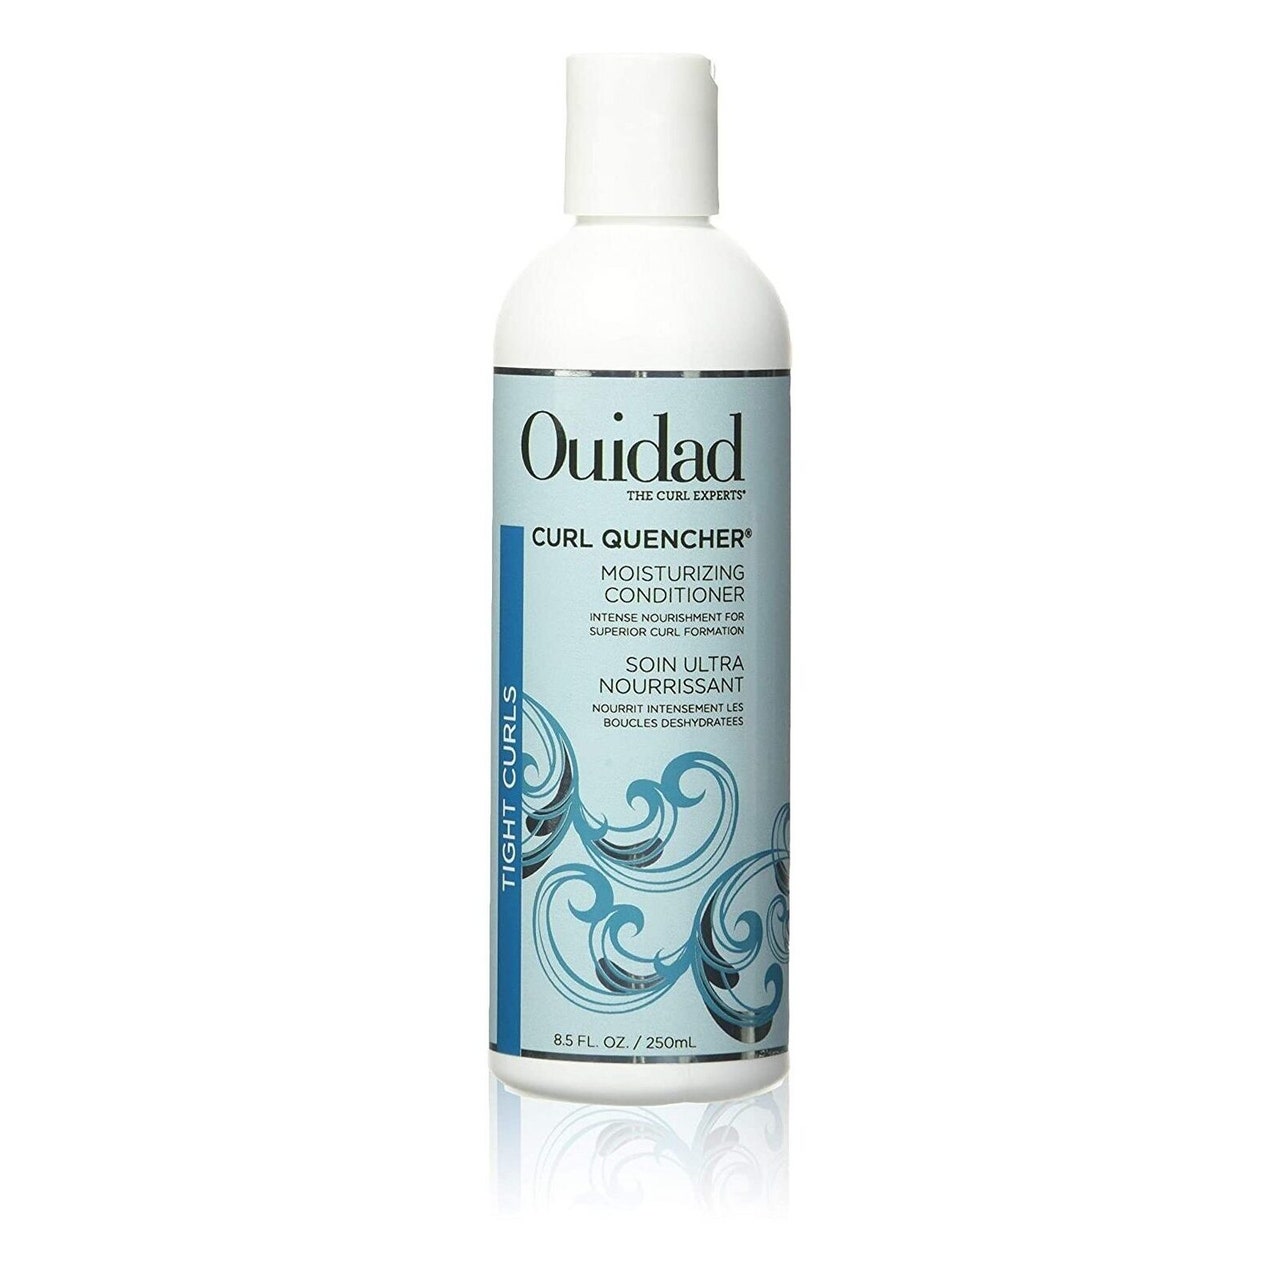 Ouidad Curl Quencher Moisturizing Conditioner on white background 